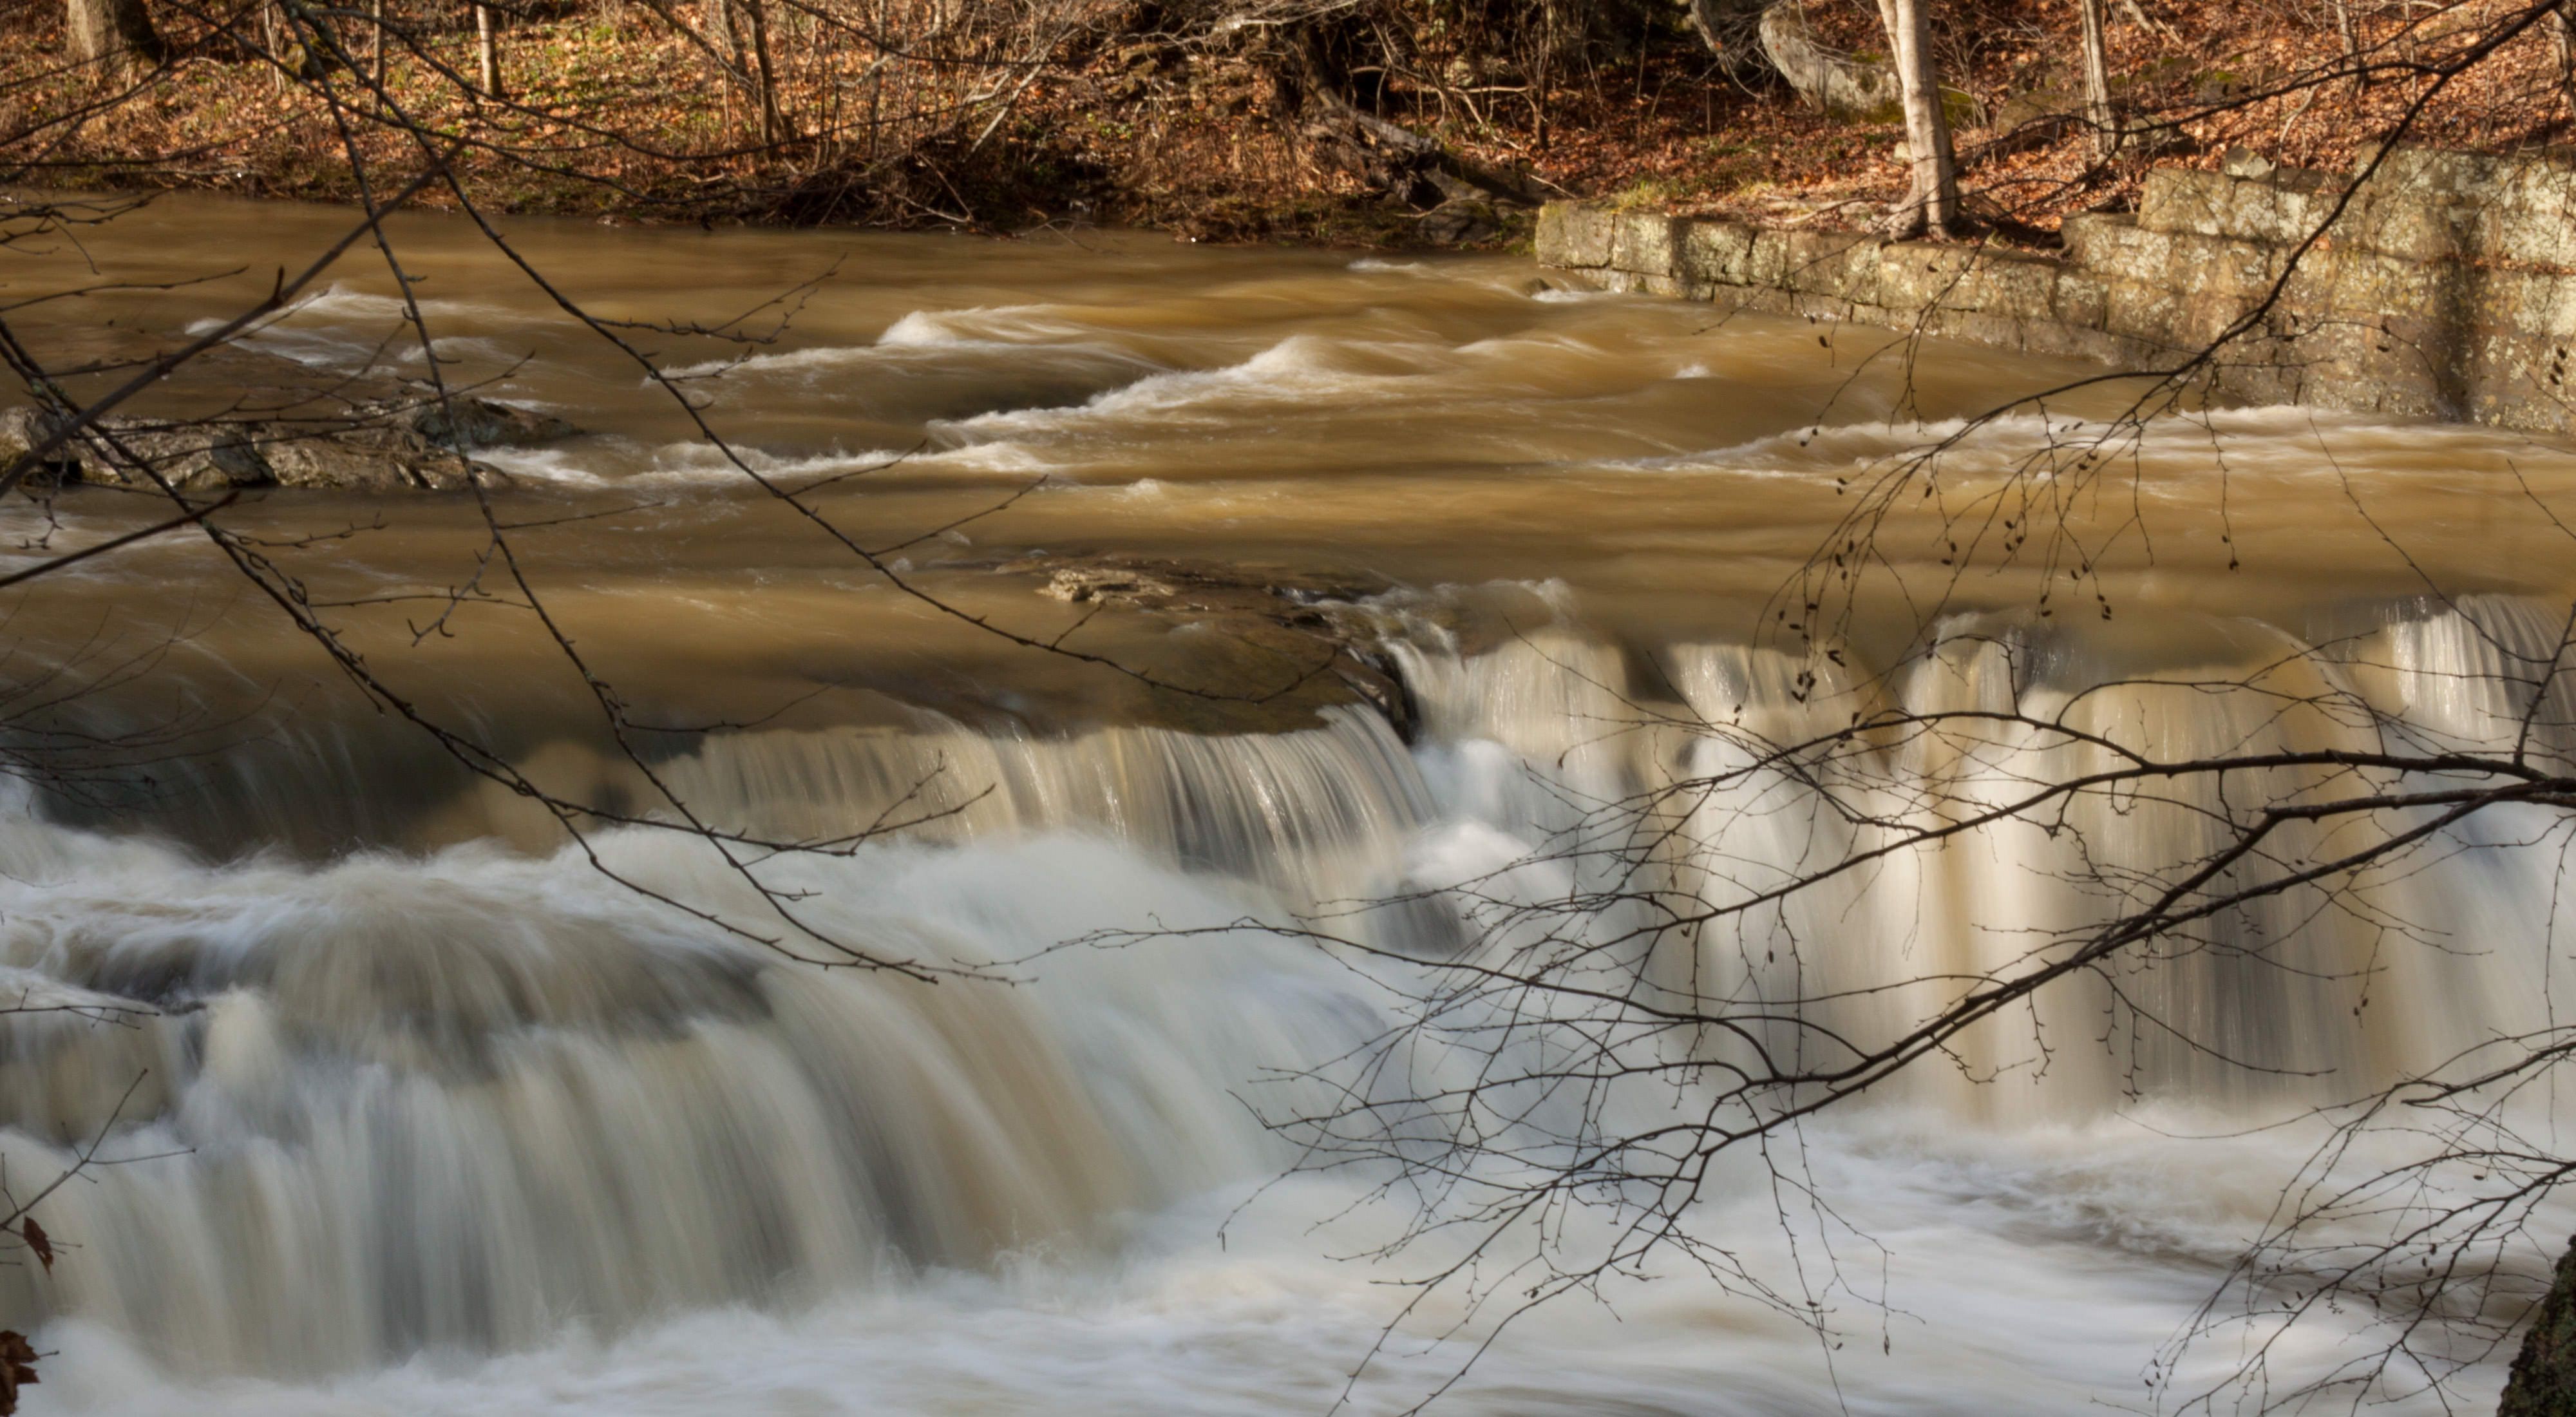 View of water rushing in a creek and over short falls in a forest.